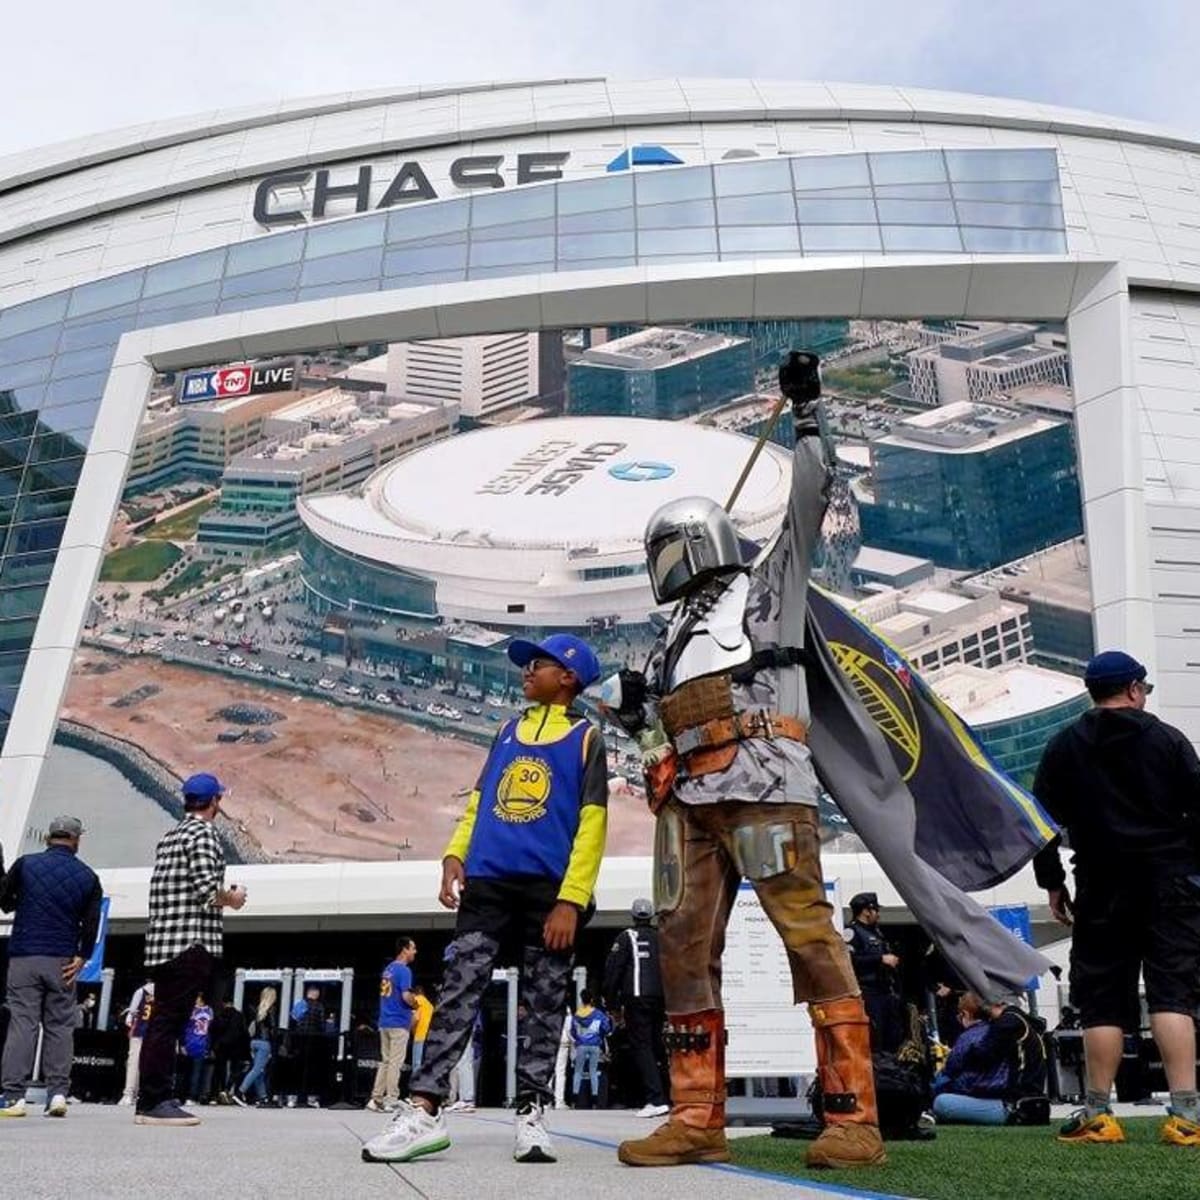 San Francisco's Chase Center reportedly will host 2025 NBA All